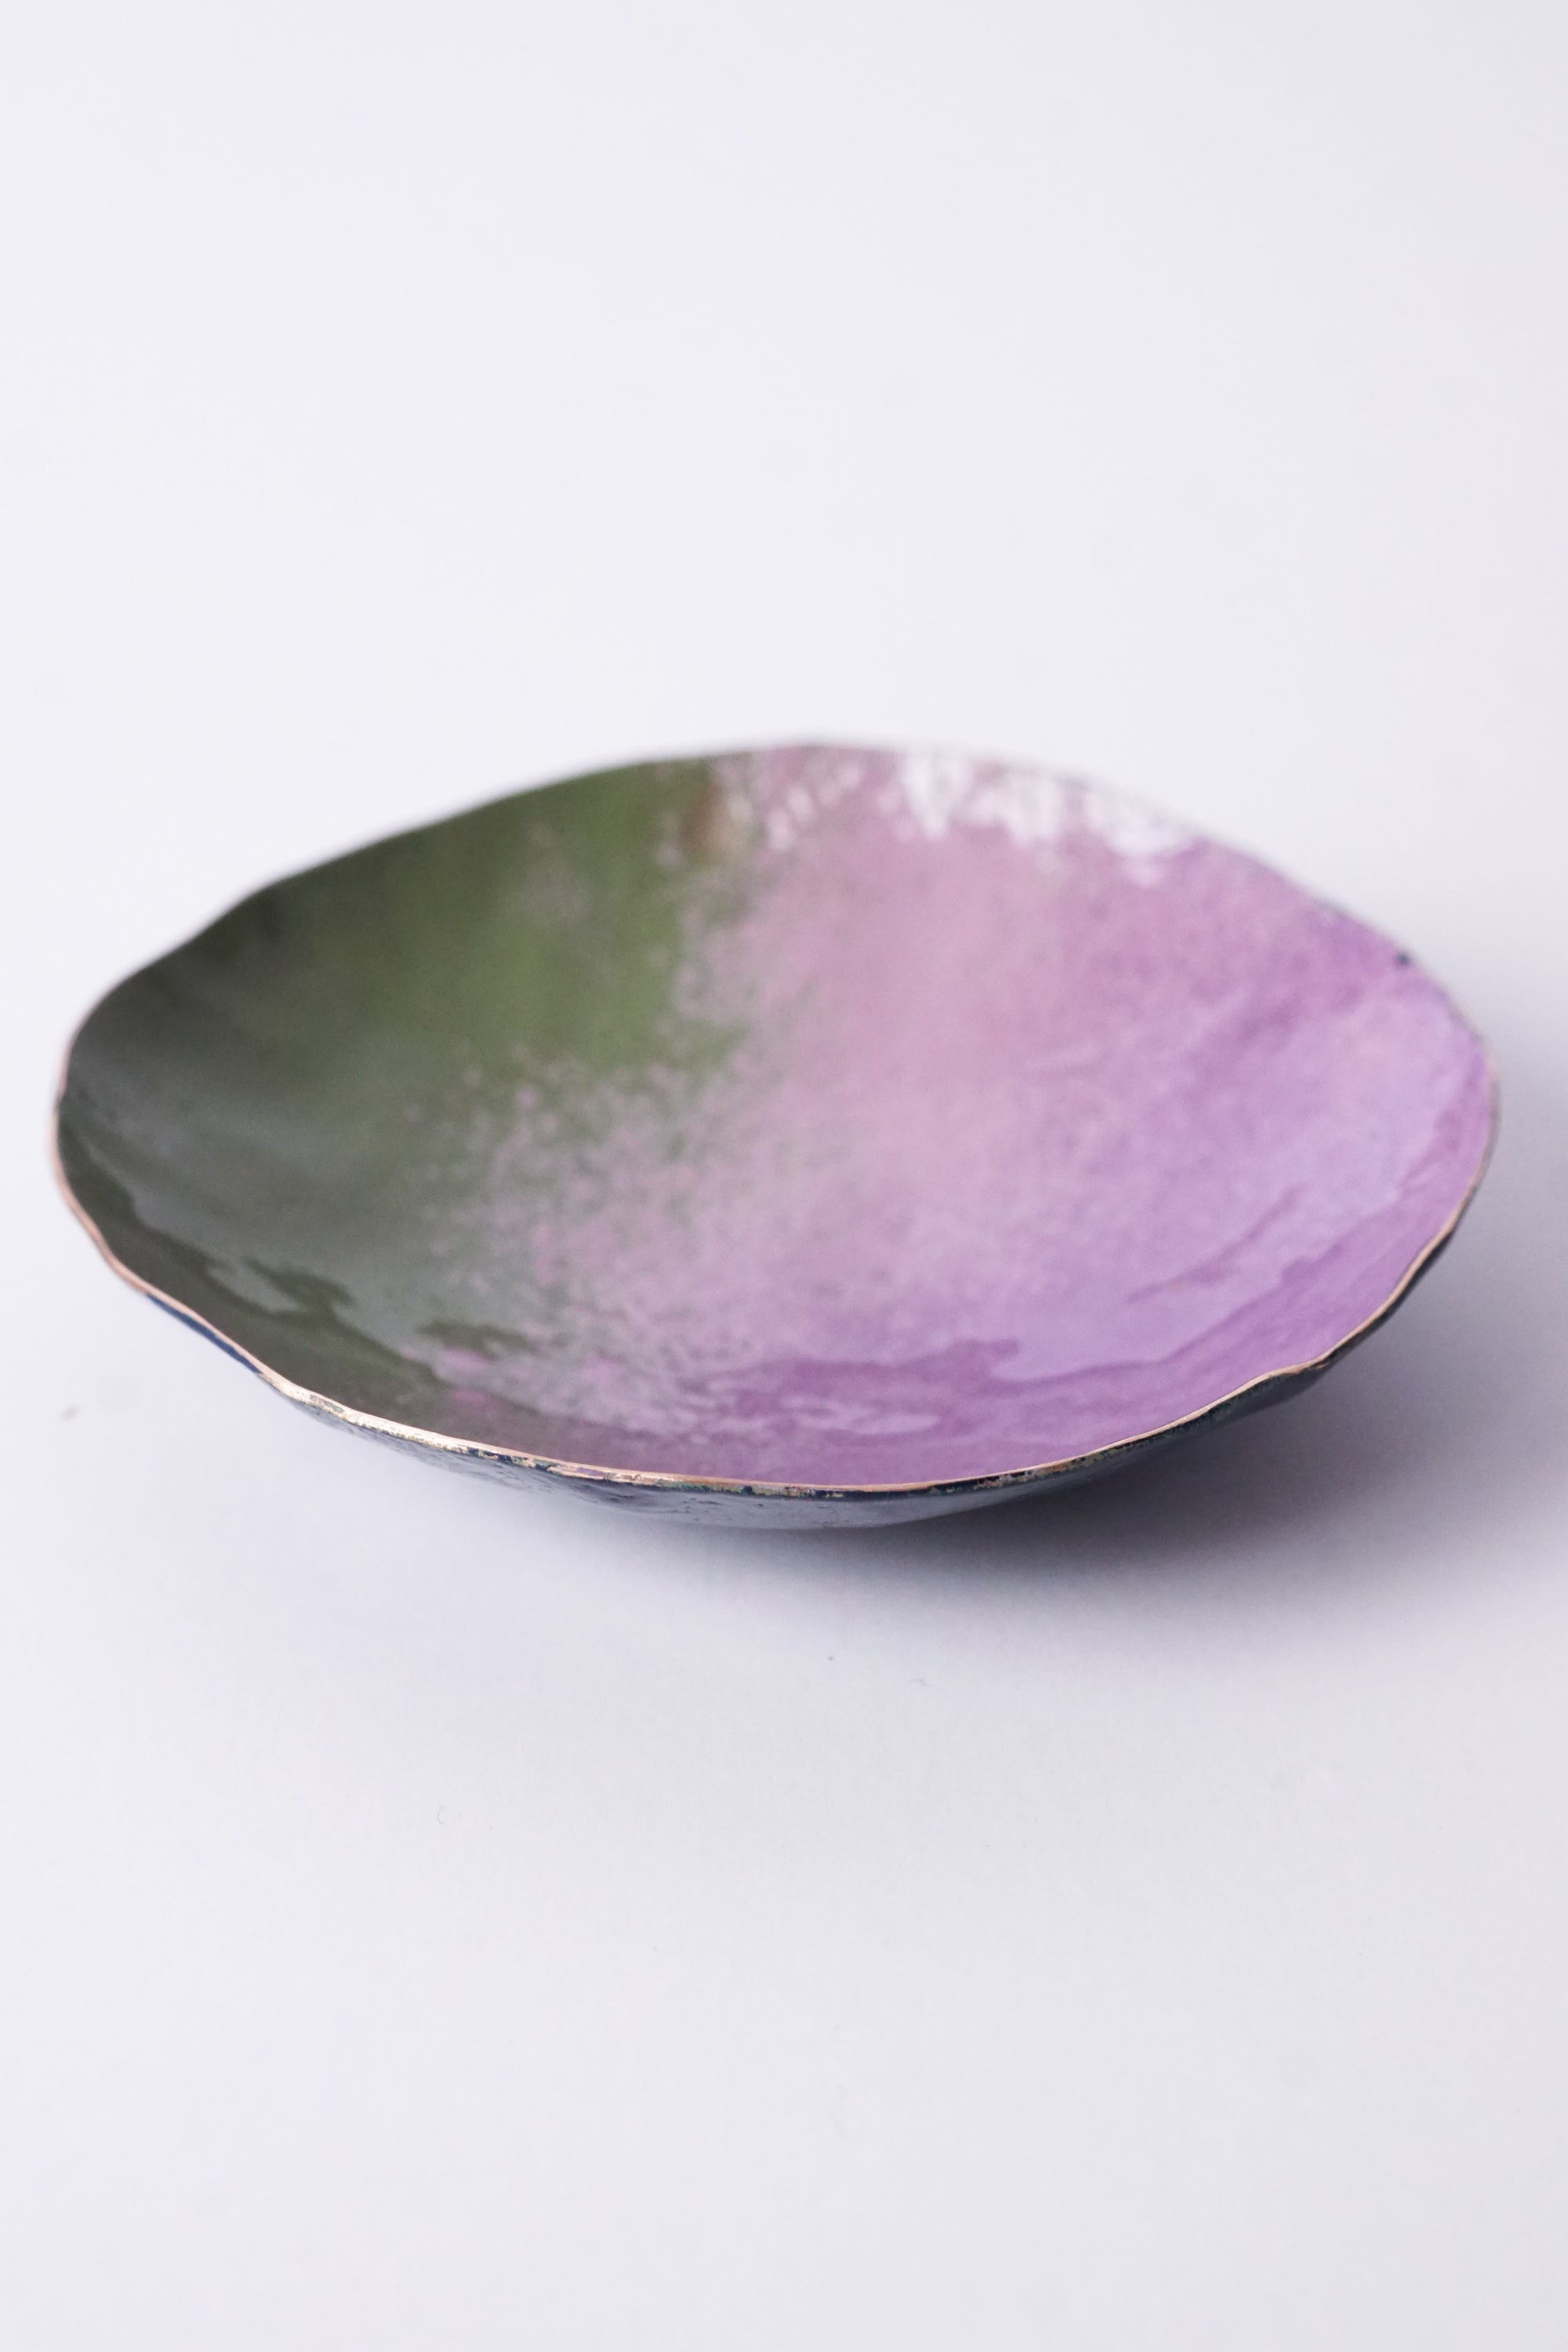 Little Copper Dish in Olive and Lavender